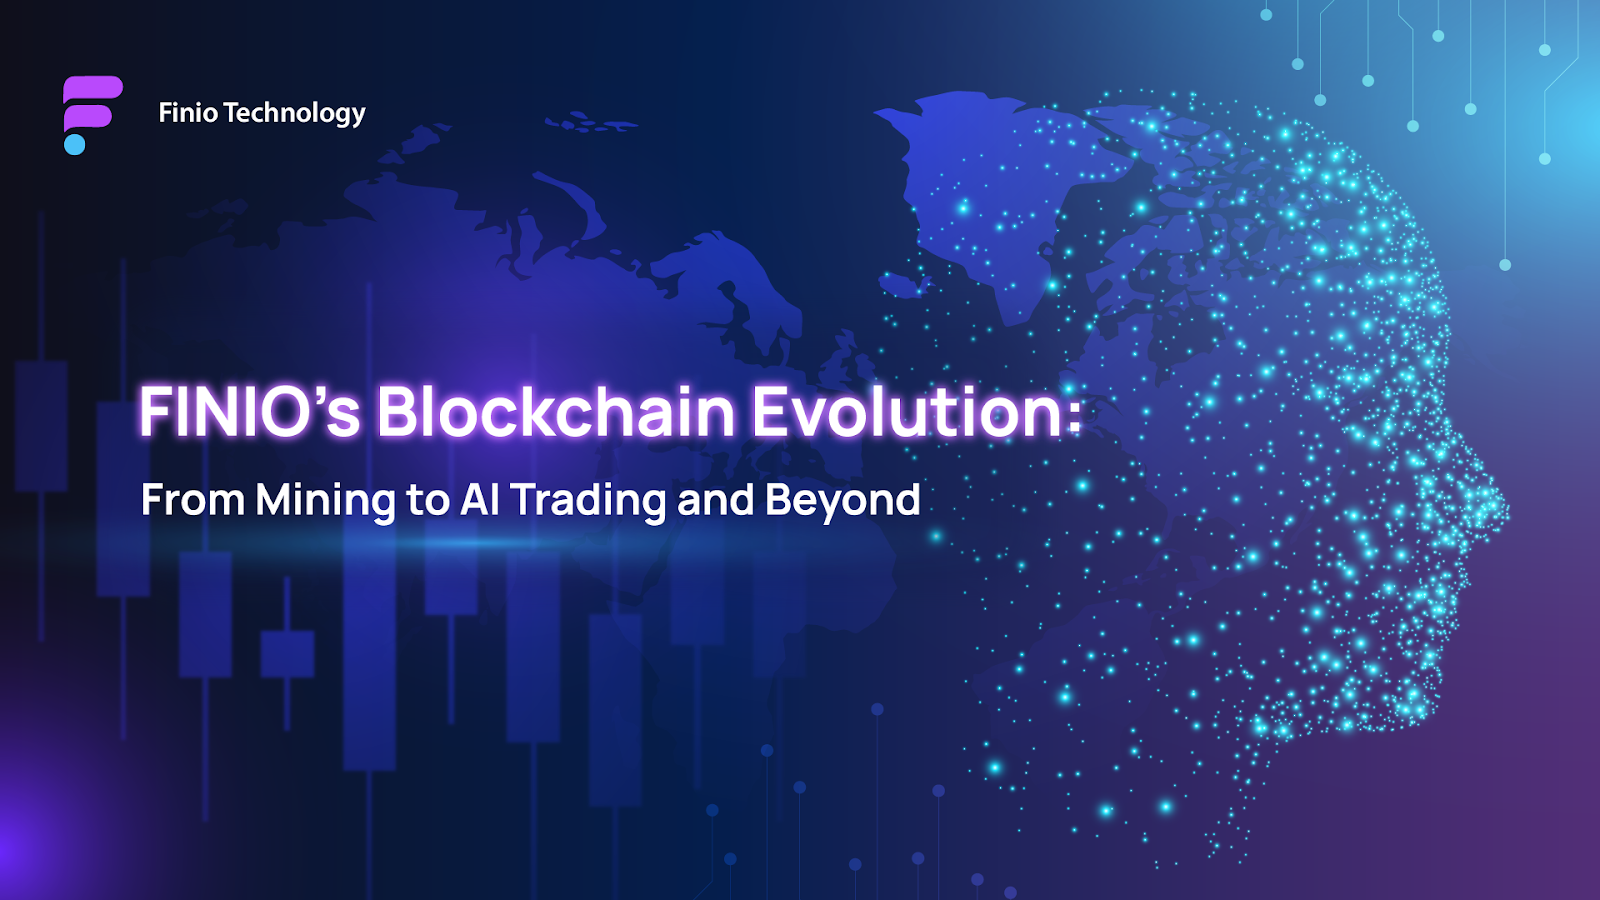 Finio’s Blockchain Evolution: From Mining to AI Trading and Beyond